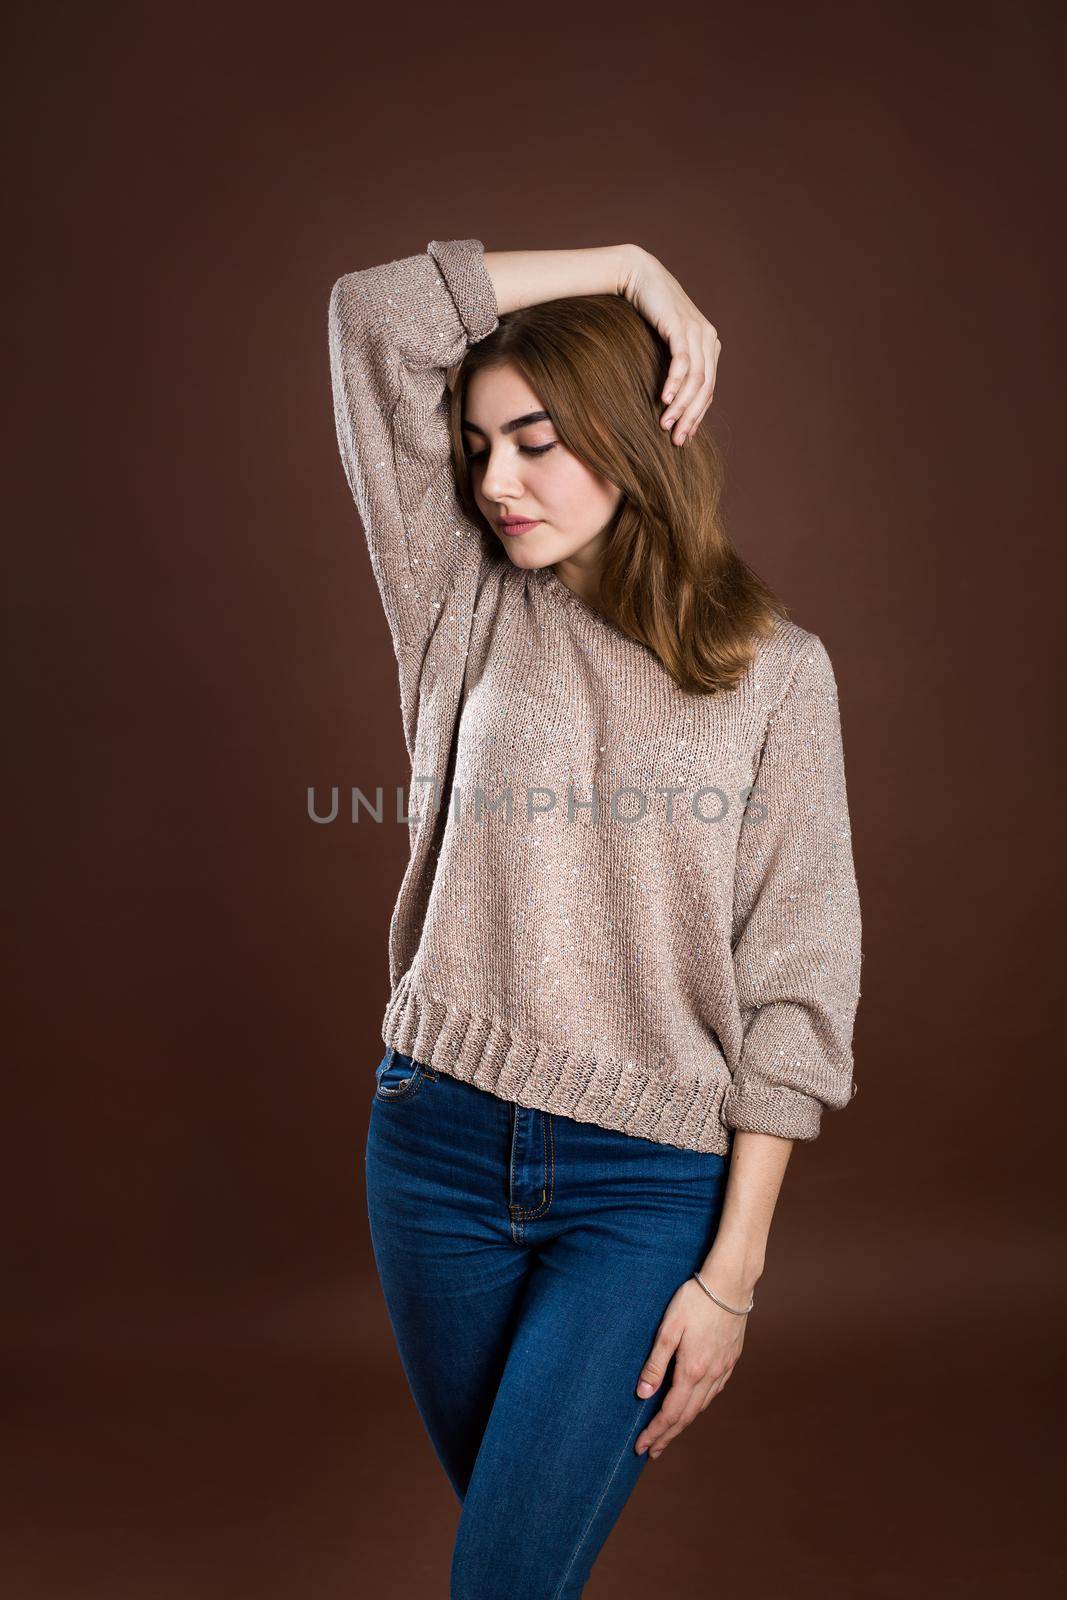 Portrait of a beautiful girl in a sweater on a brown background